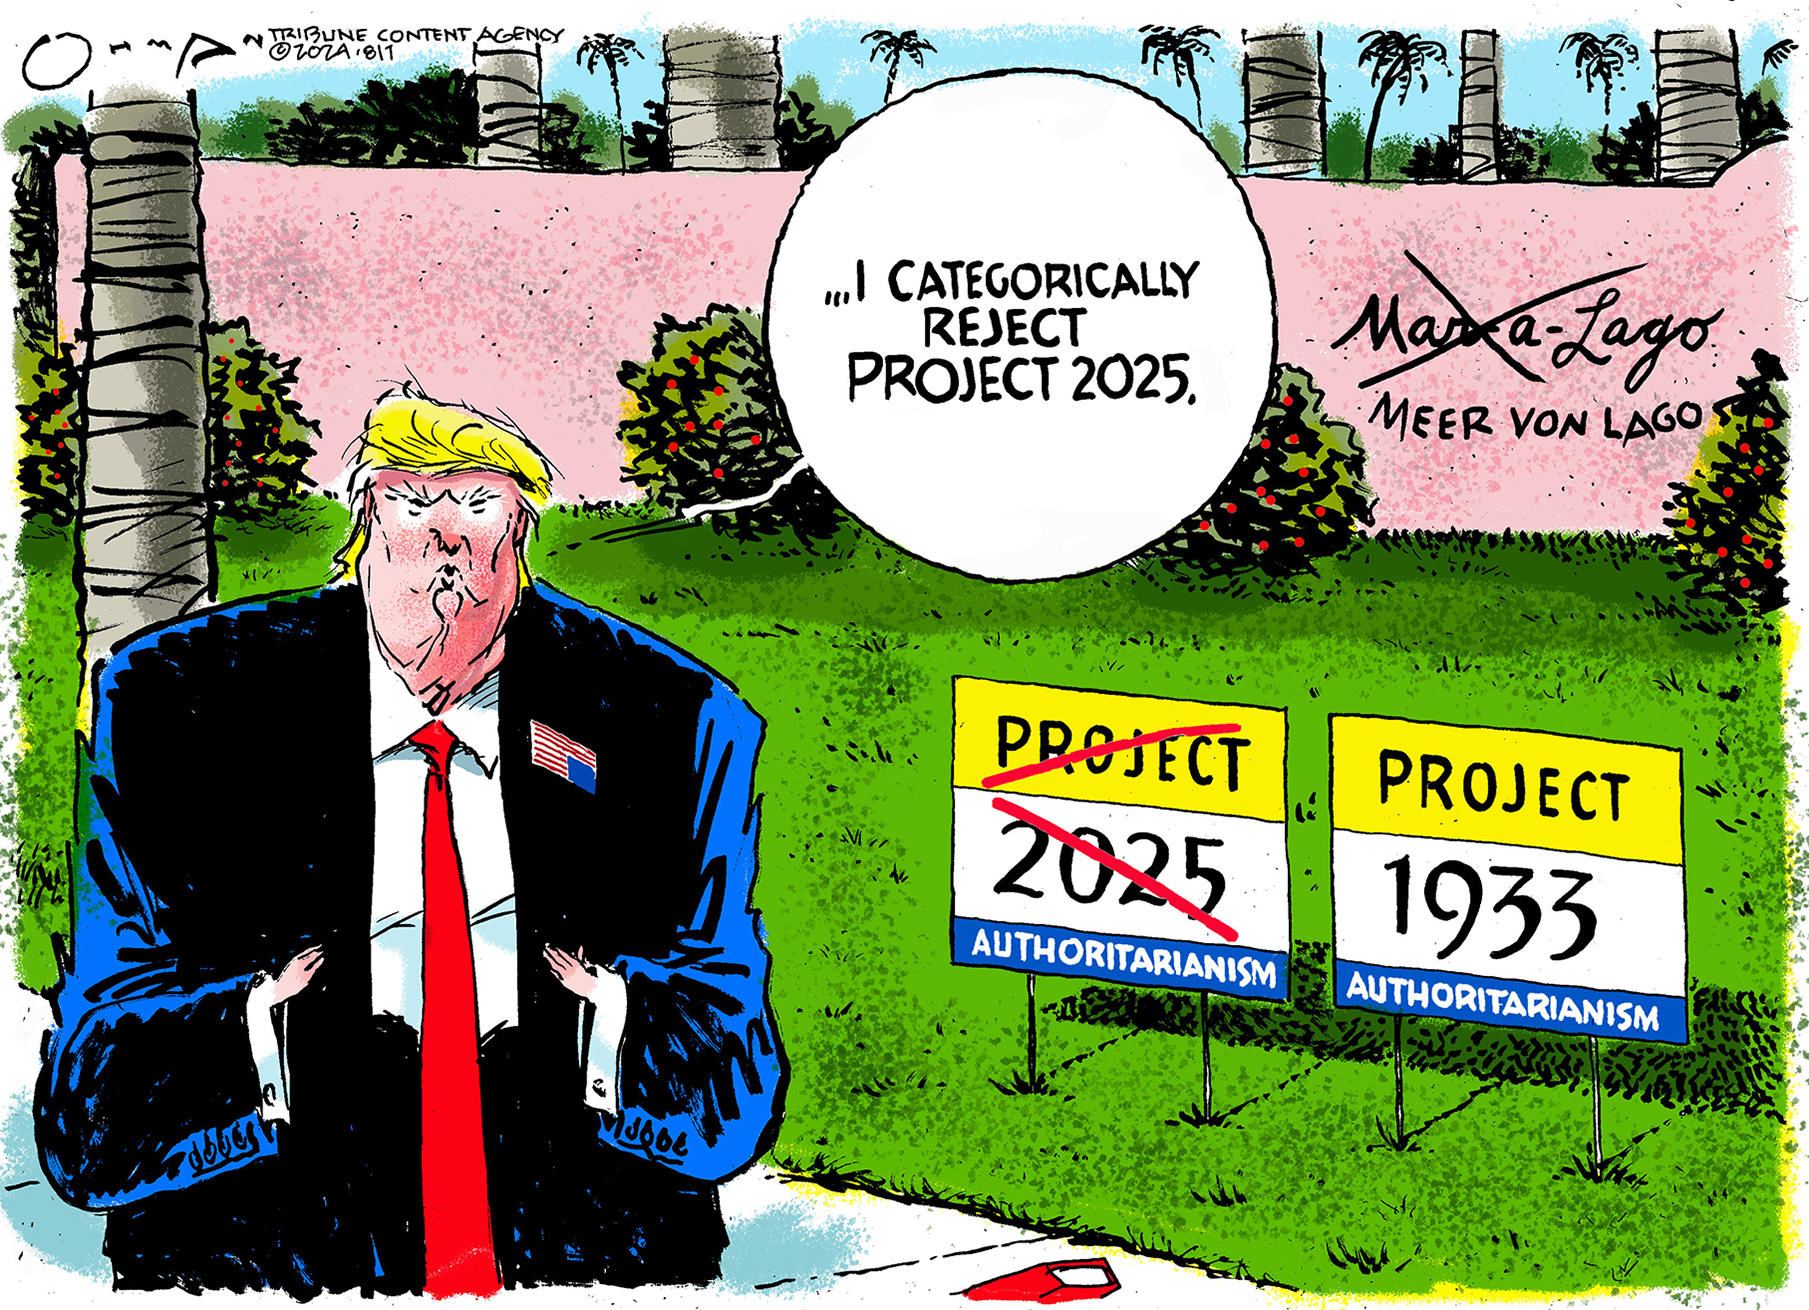  Today's political cartoons - August 1, 2024 